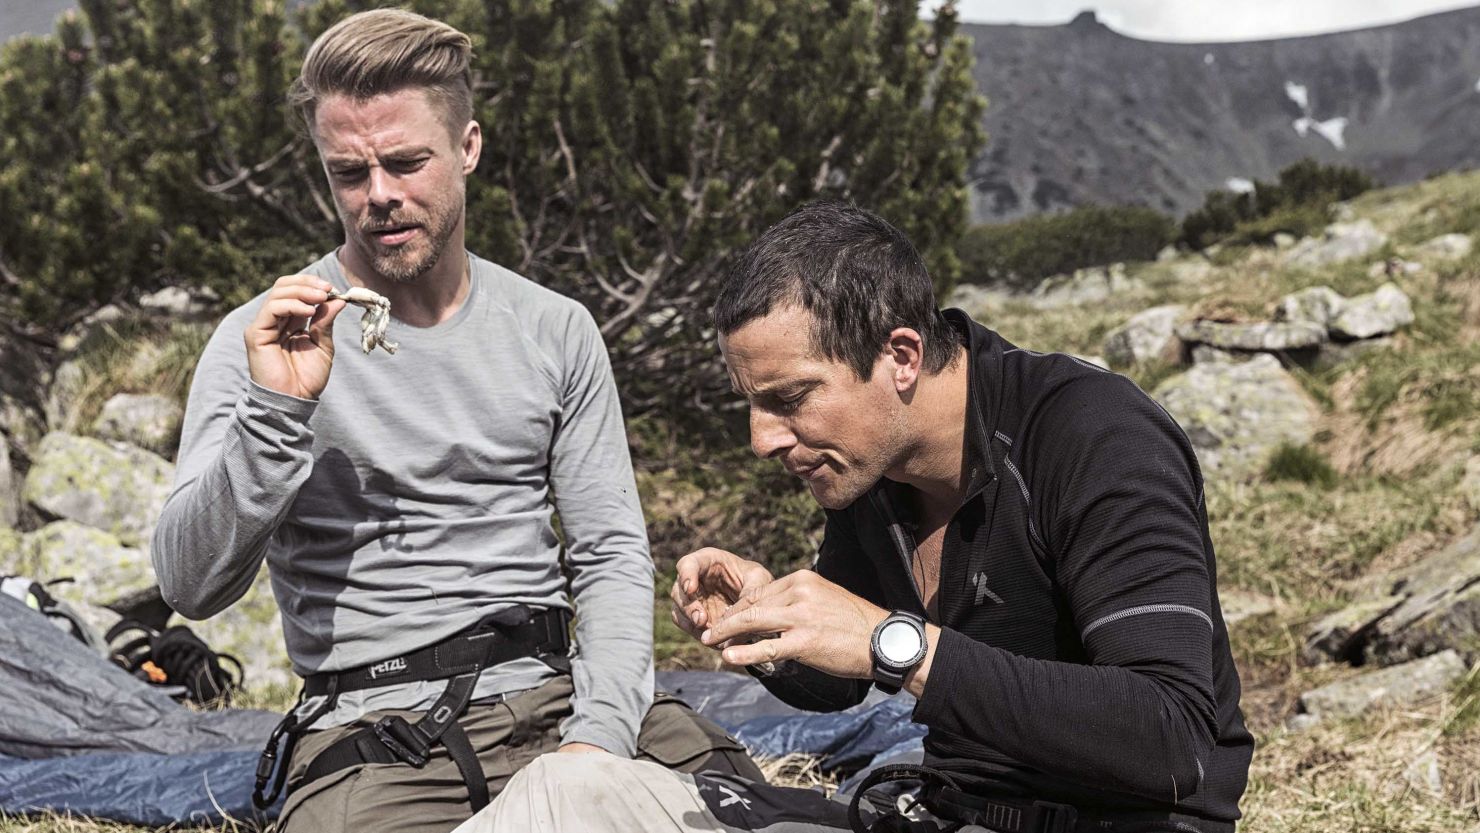 Bear Grylls, right, could face a fine from the Bulgarian government after killing a frog while filming in the Rila mountains with Derek Hough in 2017.